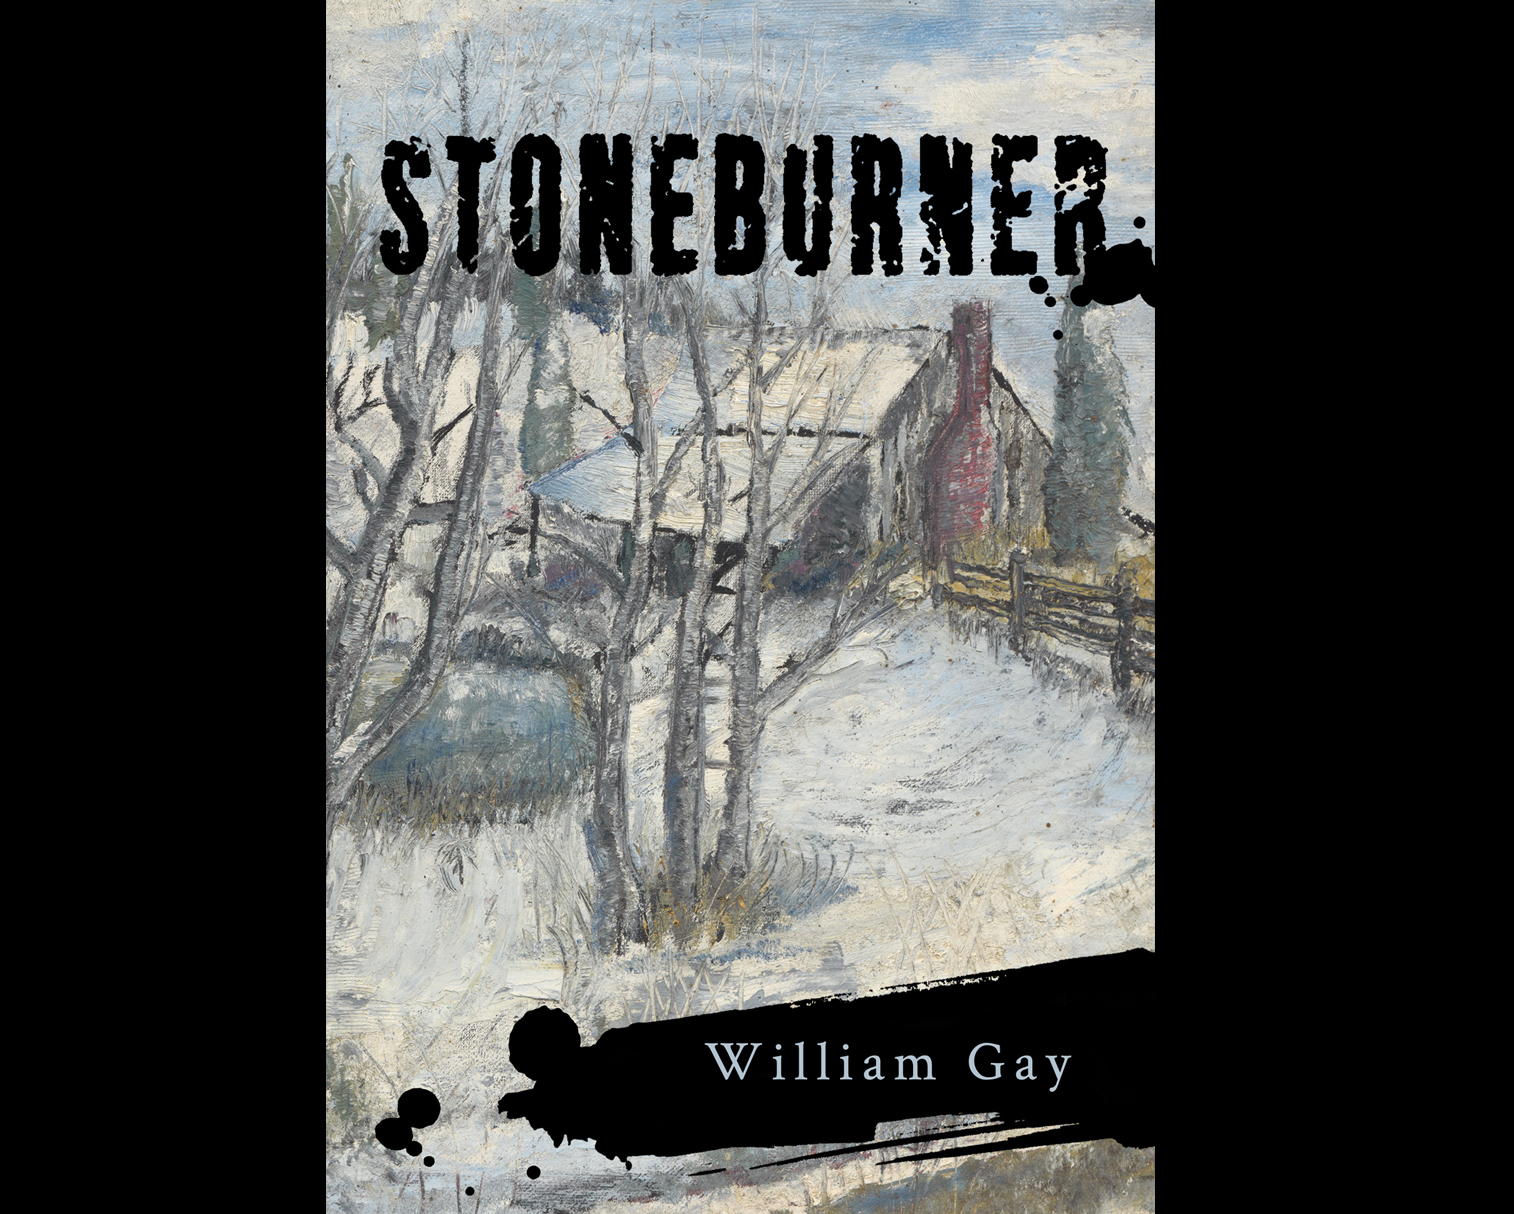    Stoneburner , by William Gay. Book Jacket Front Cover.  2017. Typography and design by Paul Nitsche. Painting by William Gay. Published by Anomolaic Press. 